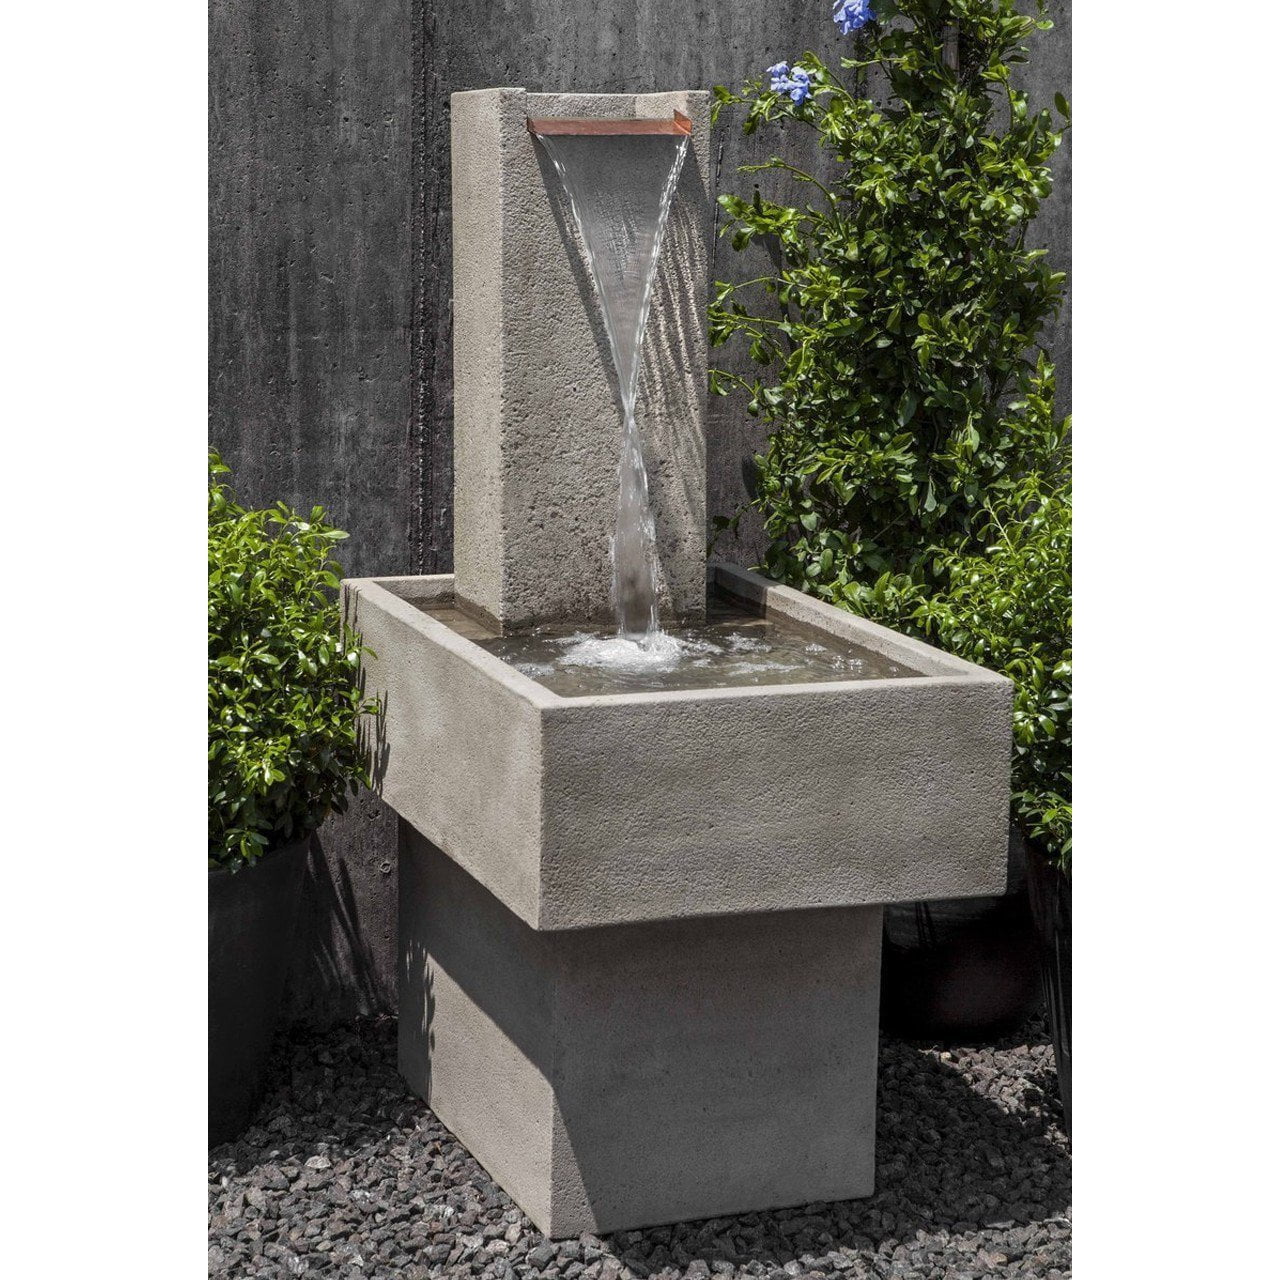 Falling Water Fountain III in Cast Stone by Campania International FT-287 - Majestic Fountains